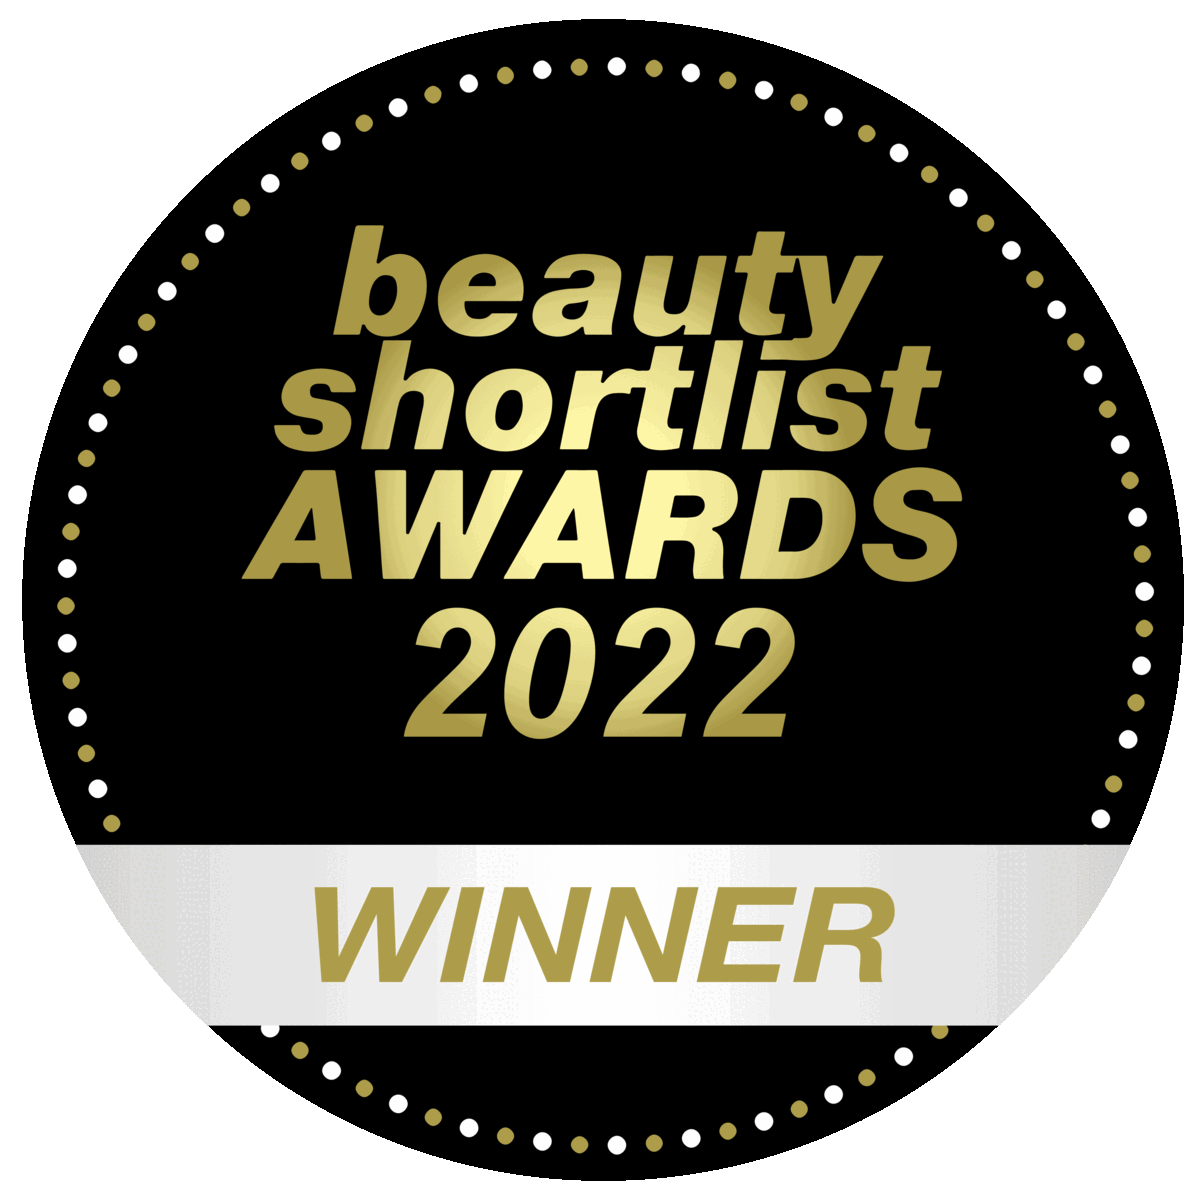 beauty shortlist awards 2022 winner, for soft, smooth lips,
              KIND TO SKIN & PLANET SINCE 1984 
              Ingredients From Nature 
              Leaping Bunny Certified 
              Landfill-free Operations 
              oiA 
              Responsible Sourcing 
              Recyclable Packaging 
              